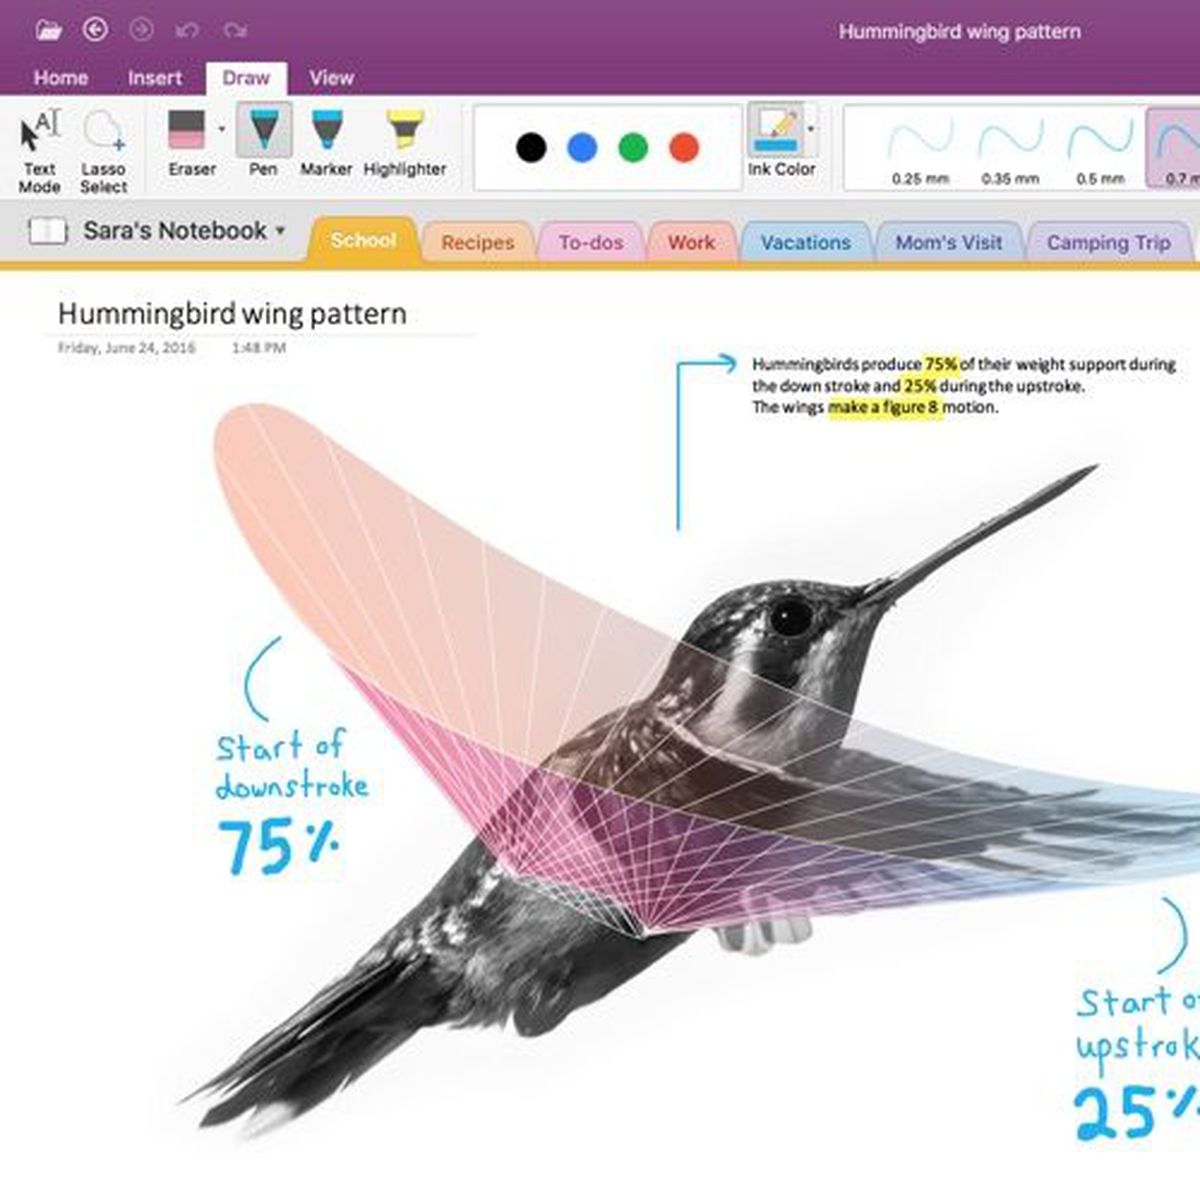 can we play video on ms onenote on macbook